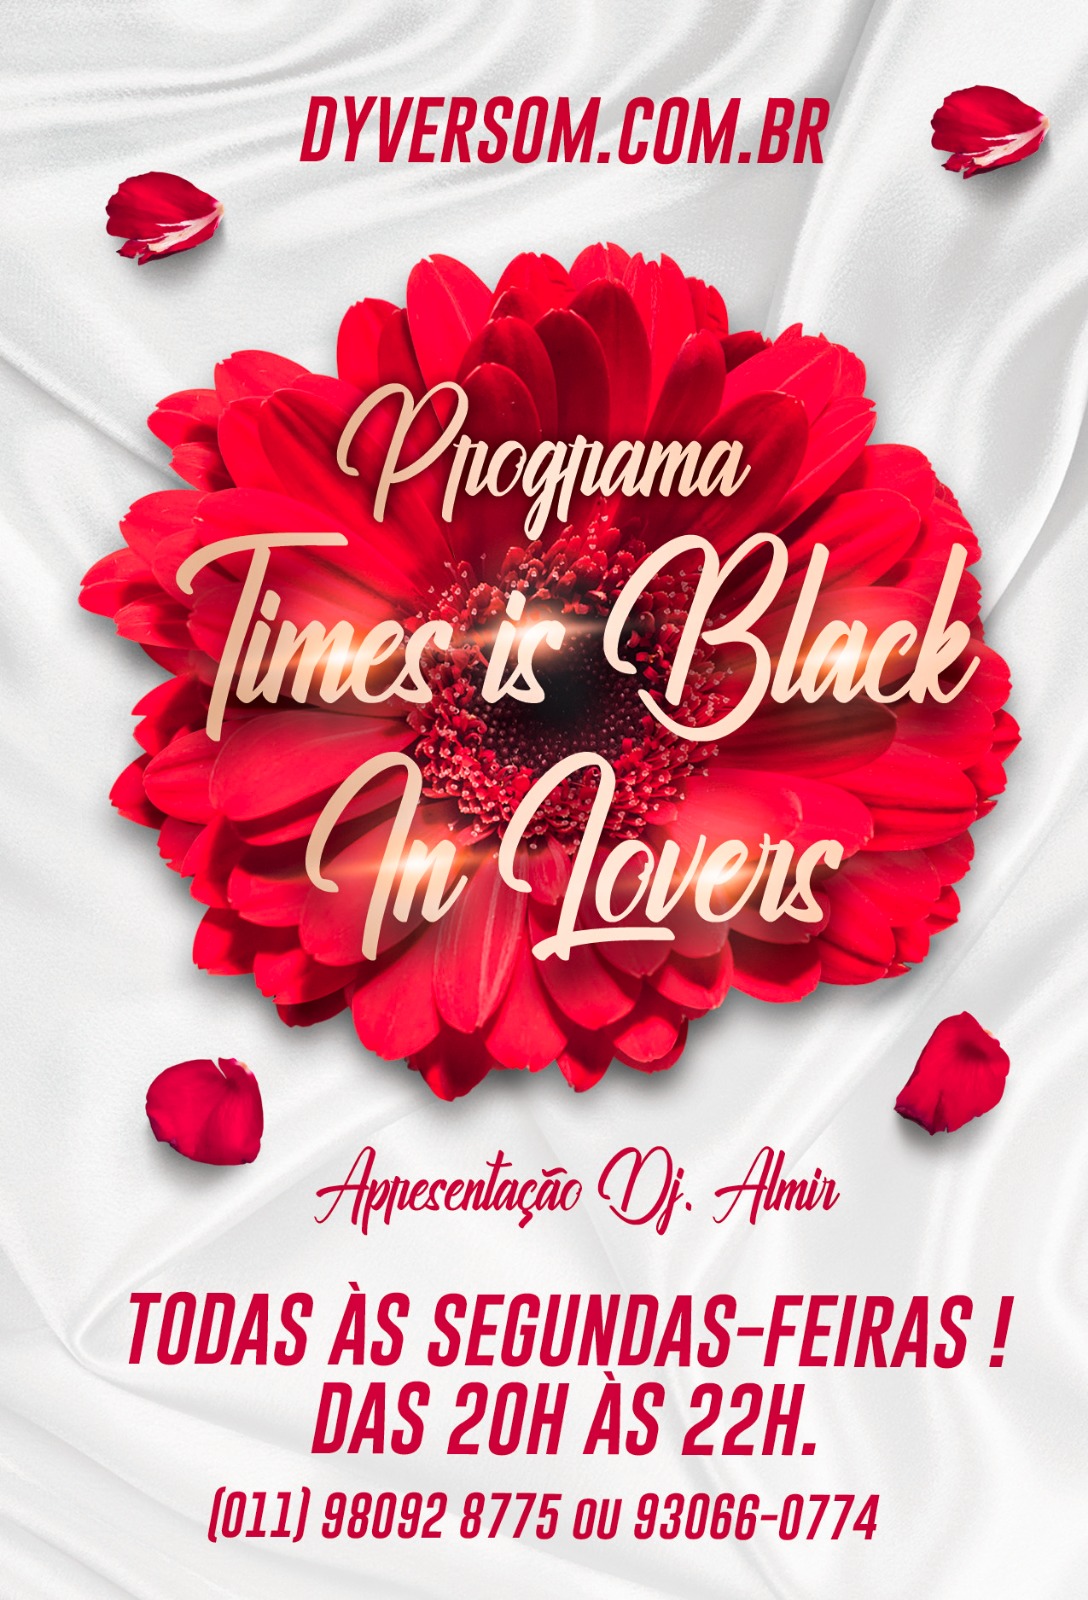 TIMES BLACK IN LOVERS ....